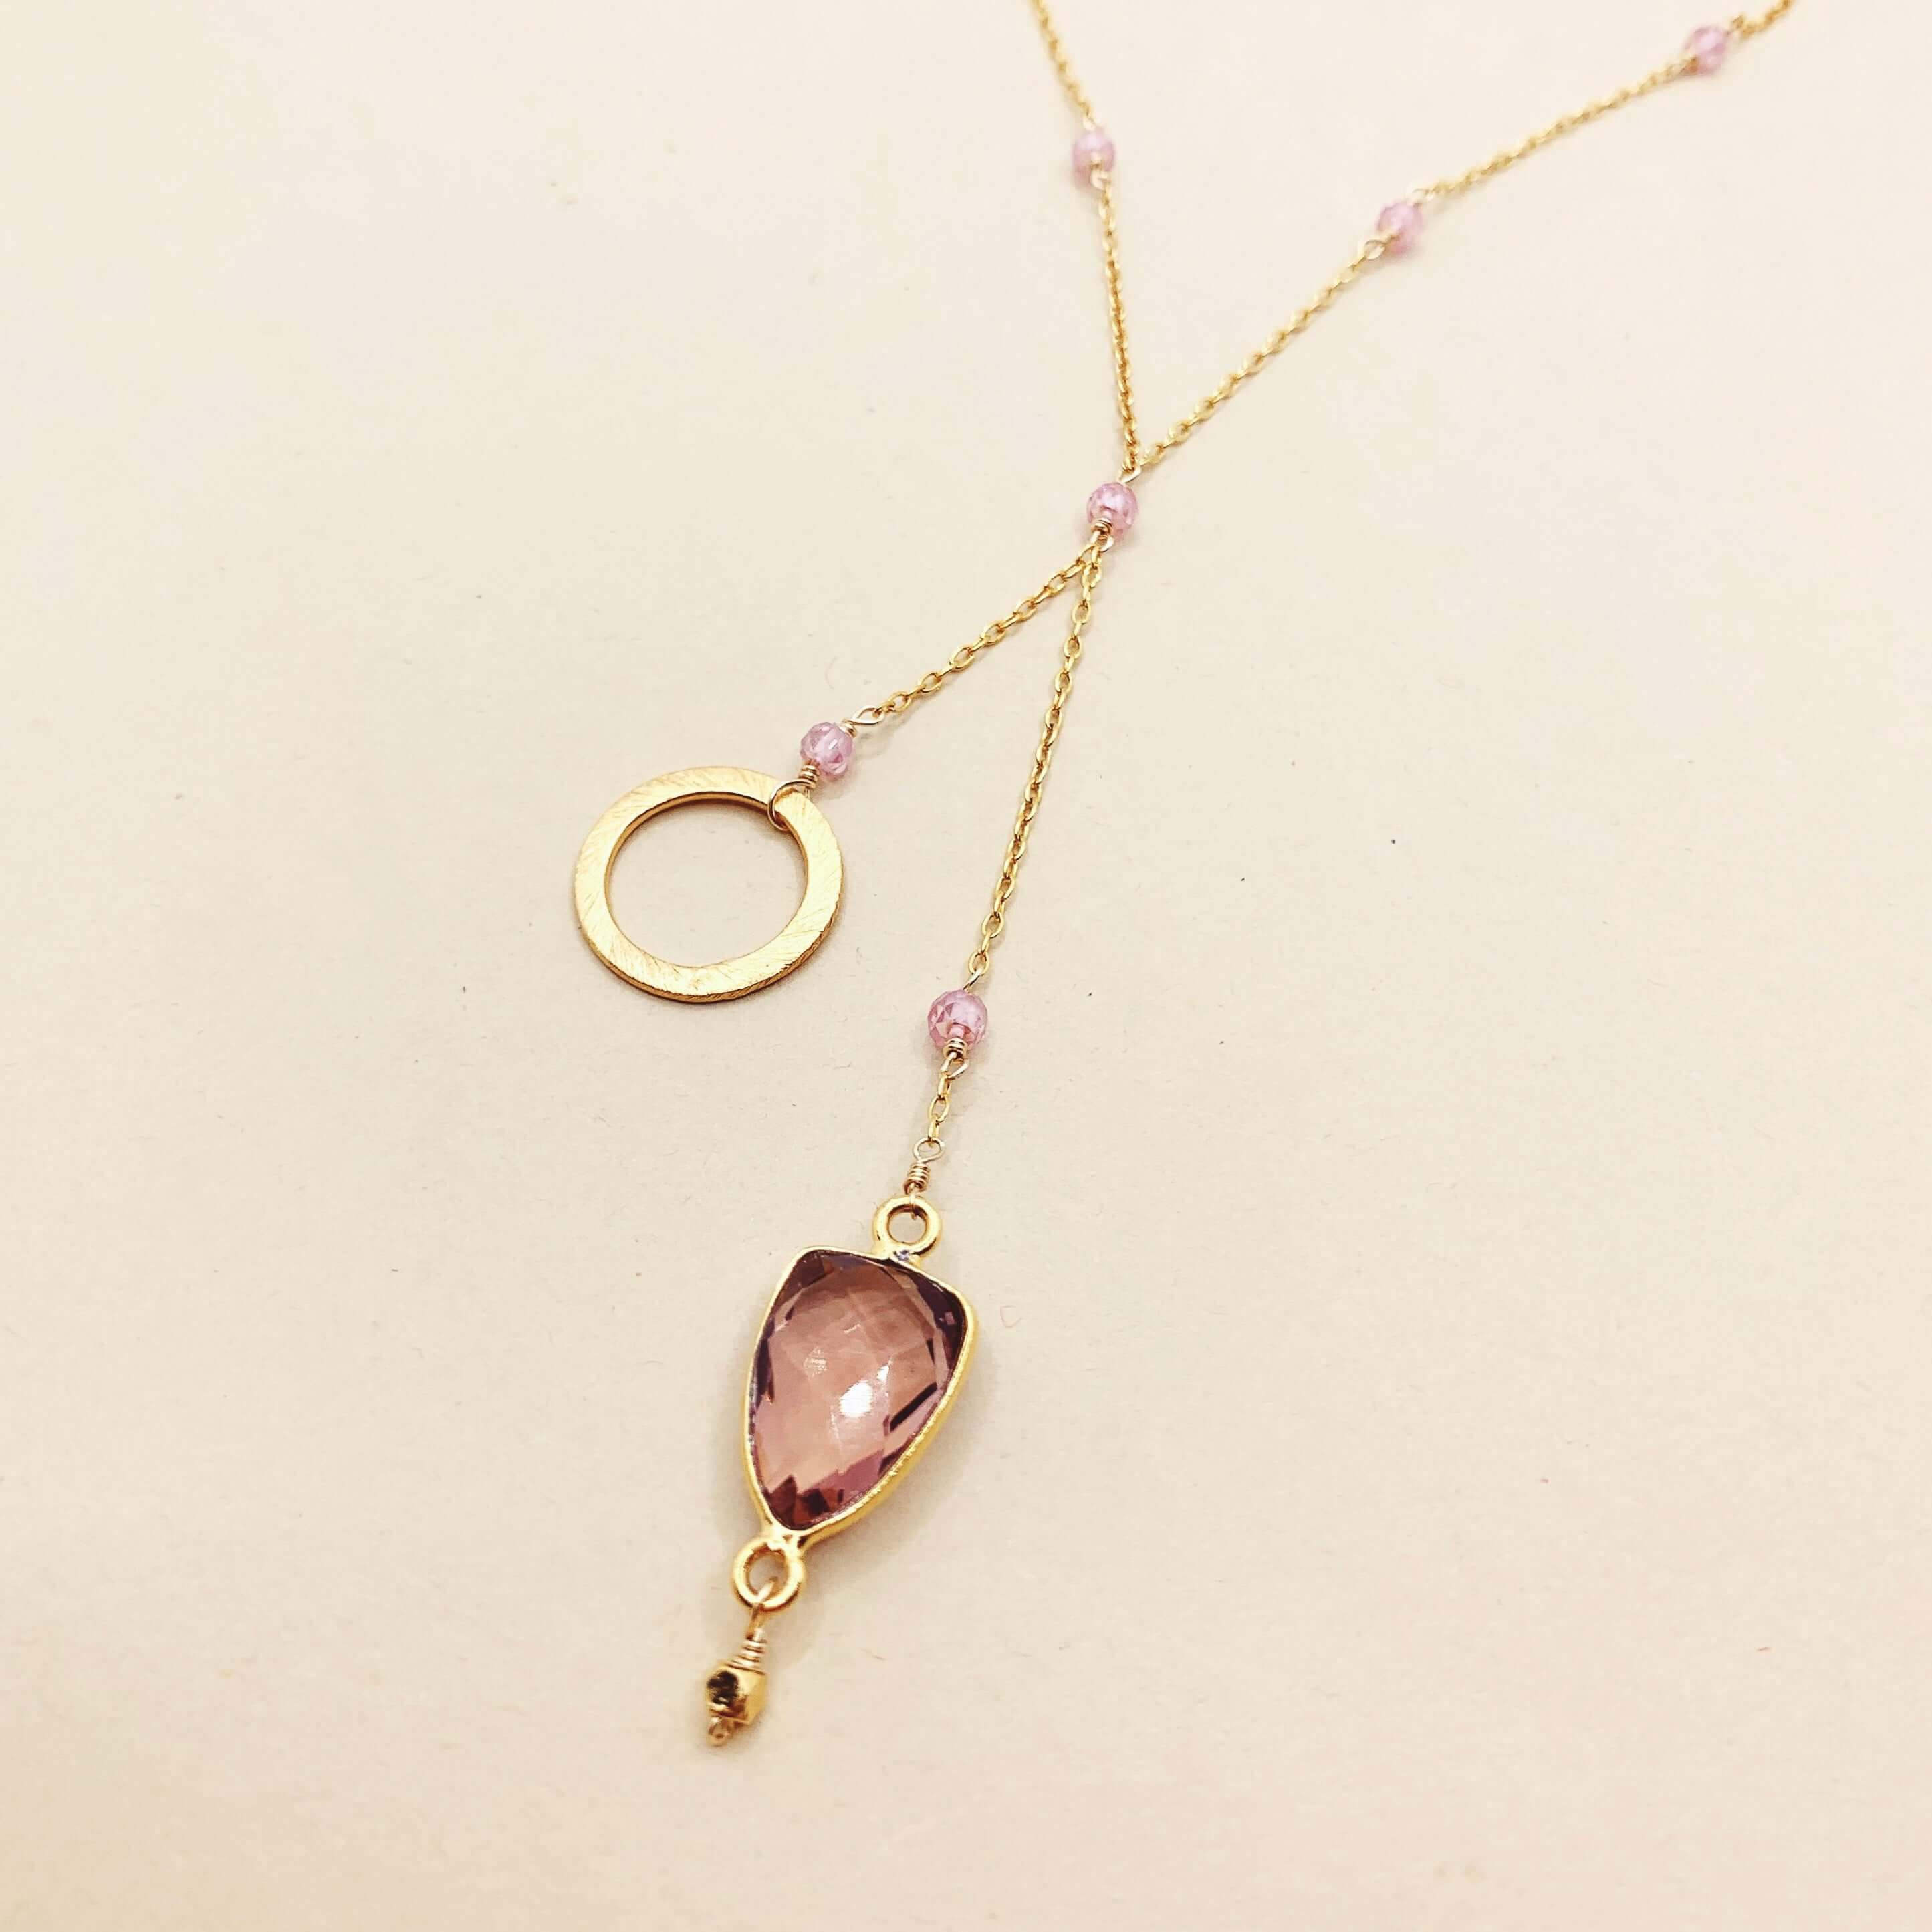 Ballet necklace with a beautiful circle accent and geometric Rhodolite Garnet  gemstones